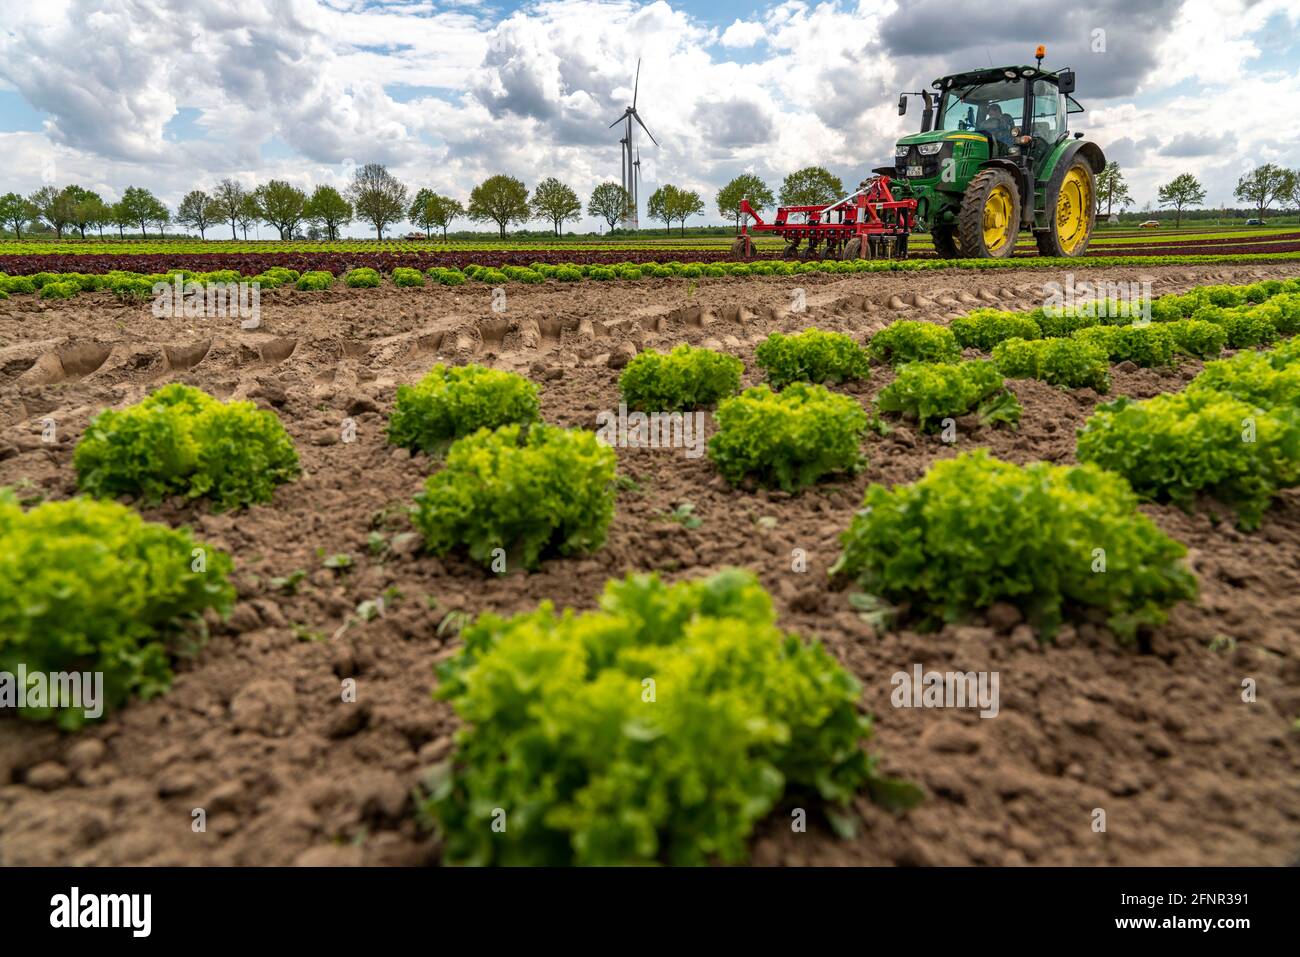 Agriculture, lettuce growing in a field, Lollo Bionda and Lollo Rossa, in long rows of plants, working the field with a finger hoe removing the weeds, Stock Photo